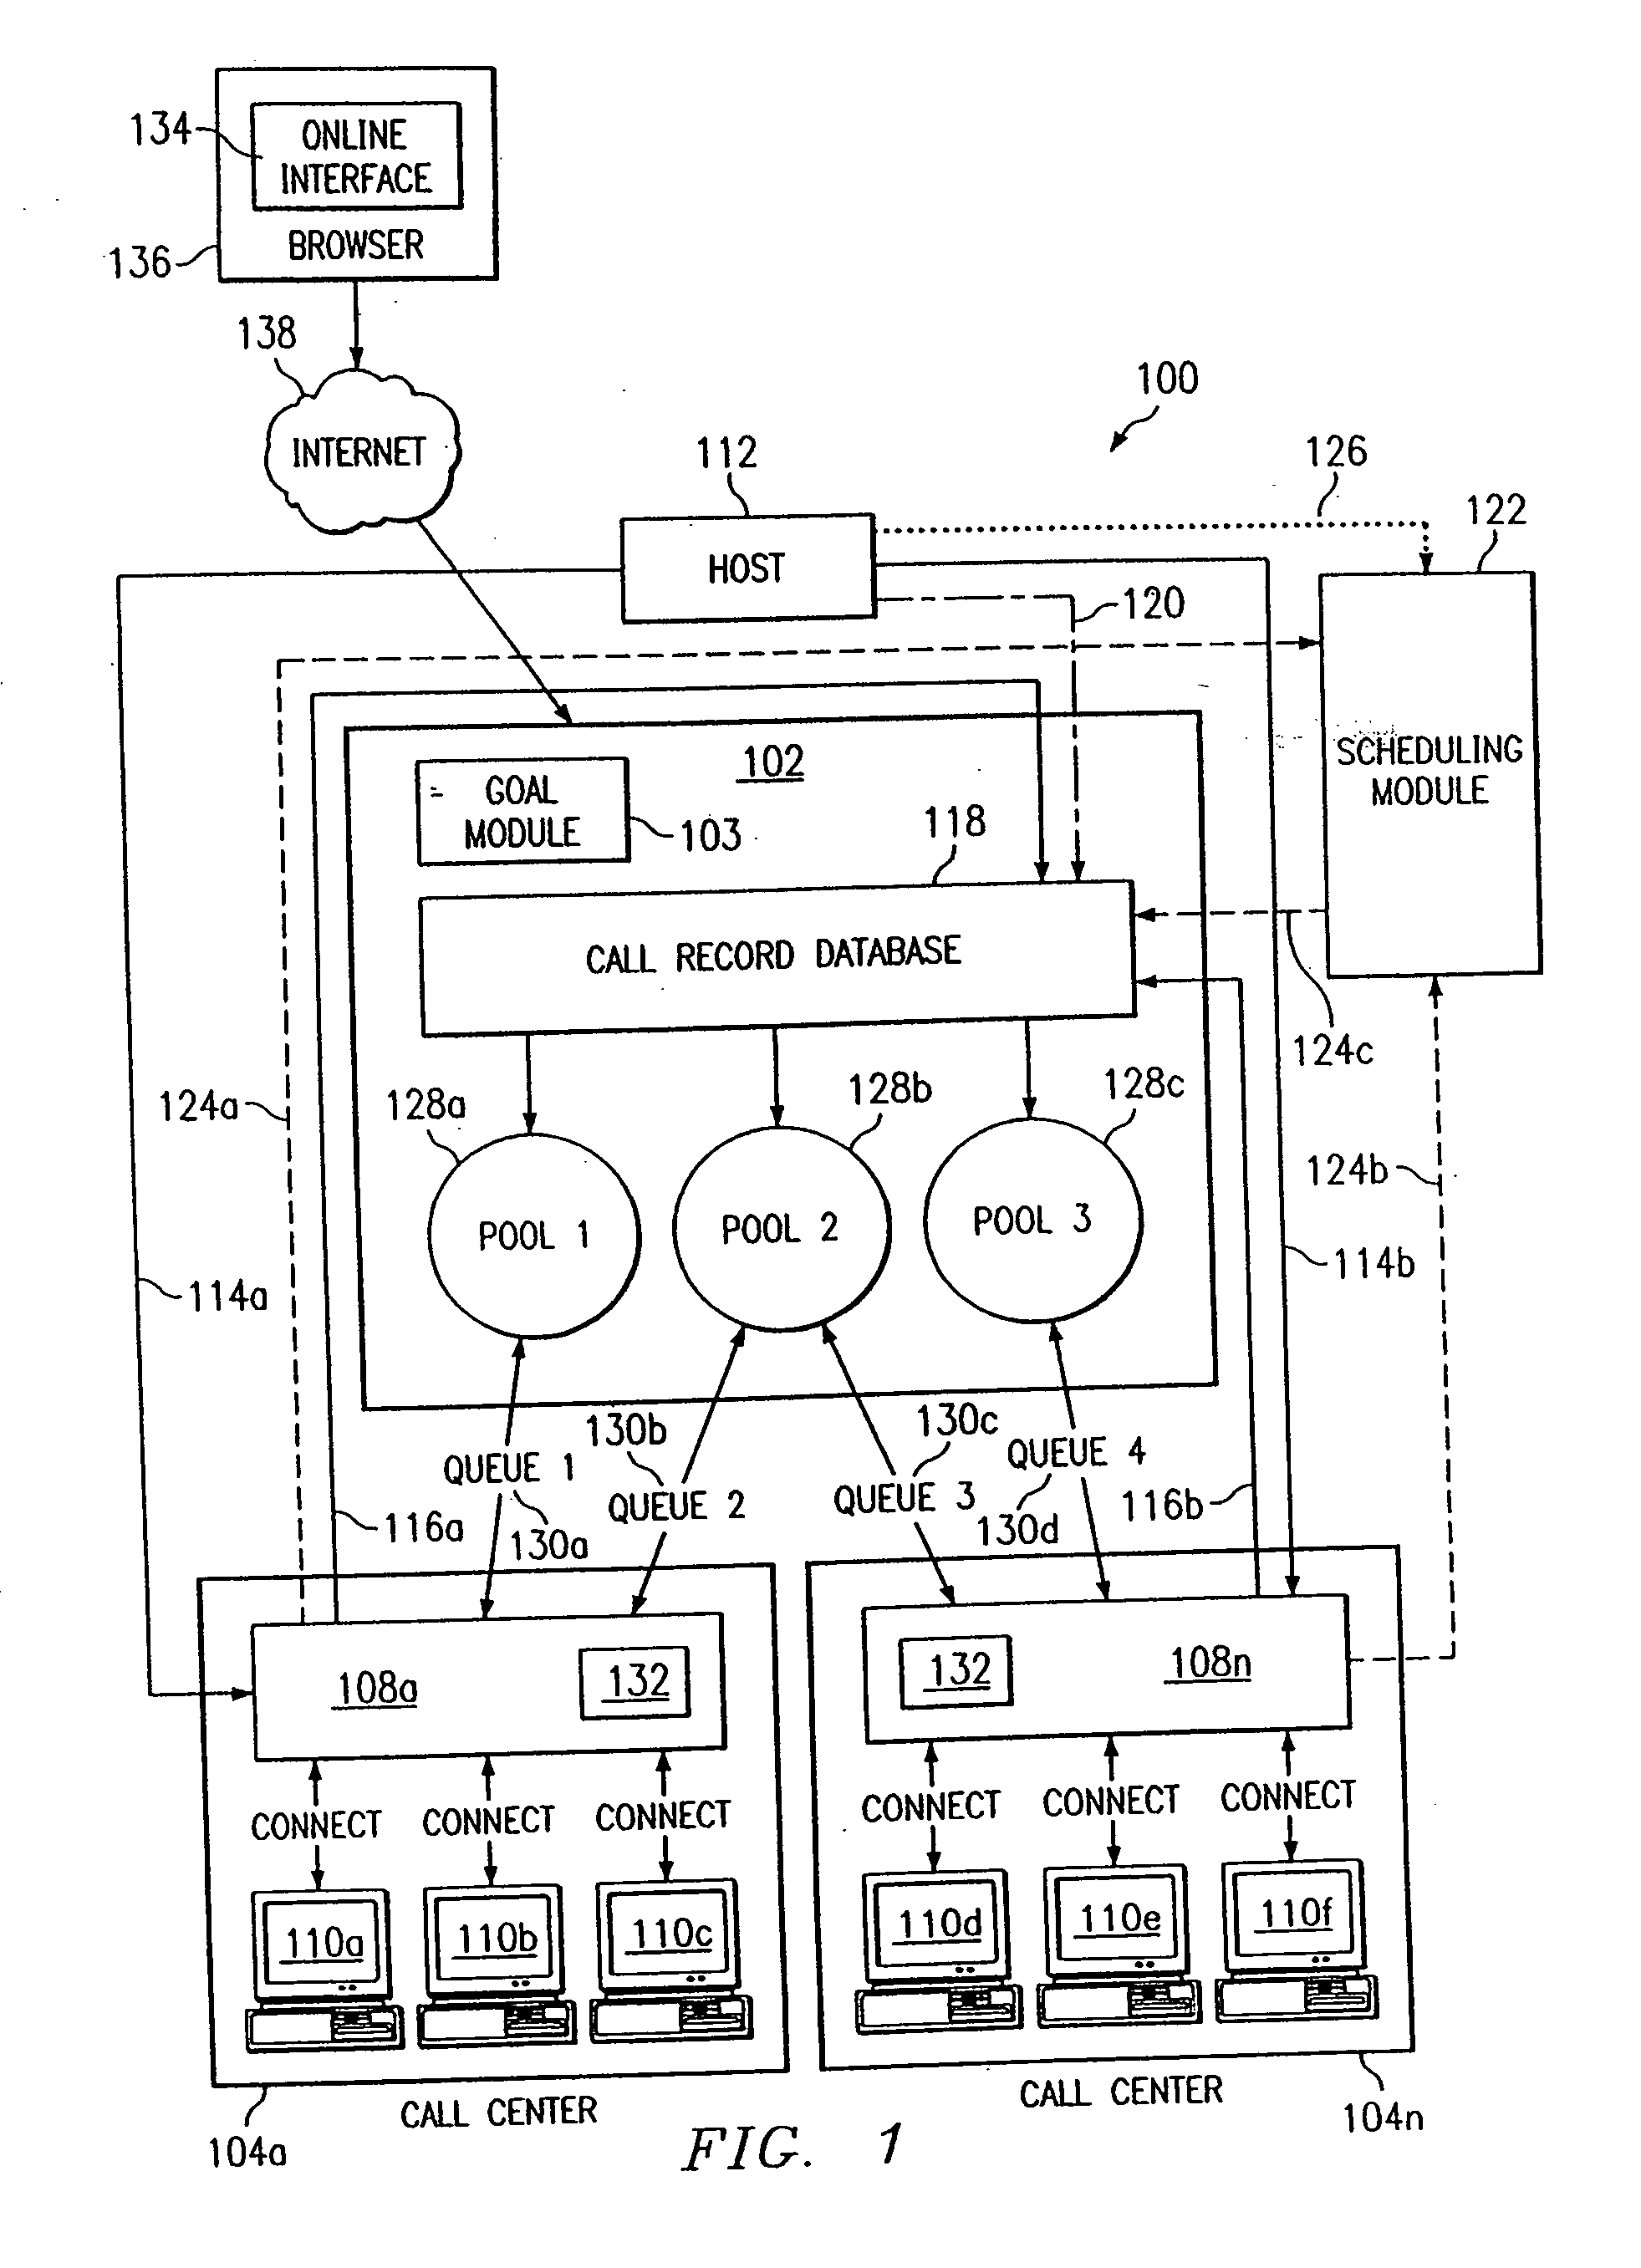 System and method for common account based routing of contact records